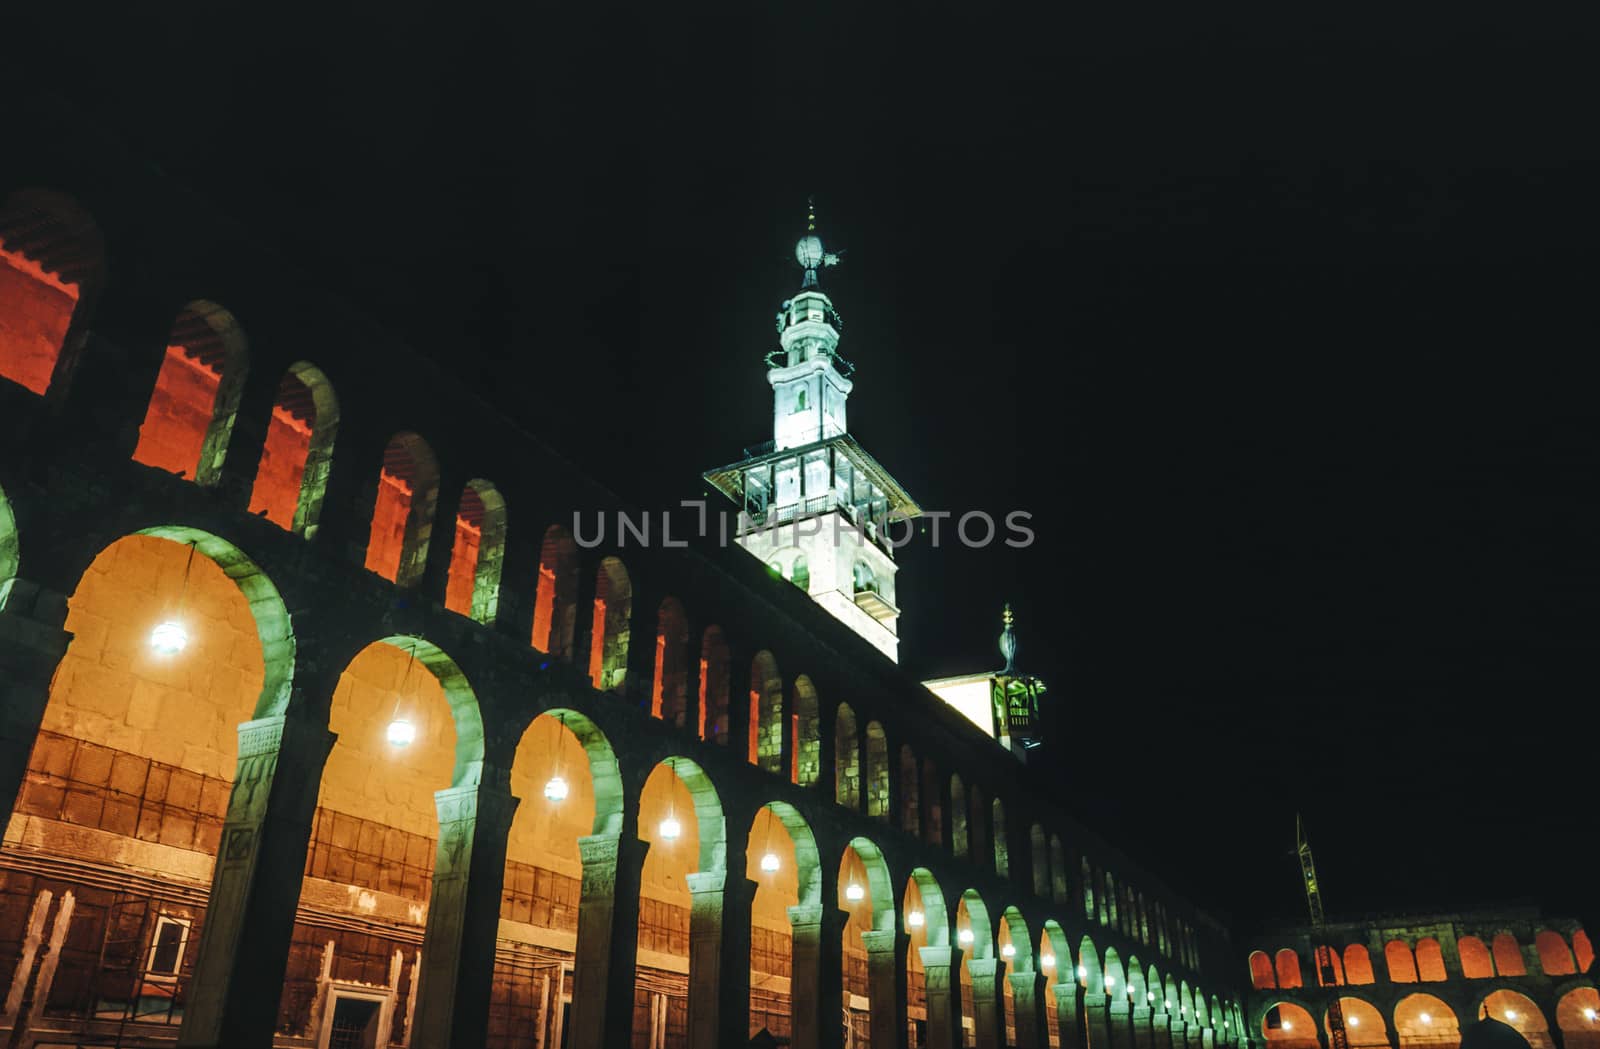 Back in 1997. The Omayyad Mosque perfectly illuminated at night. by meinzahn